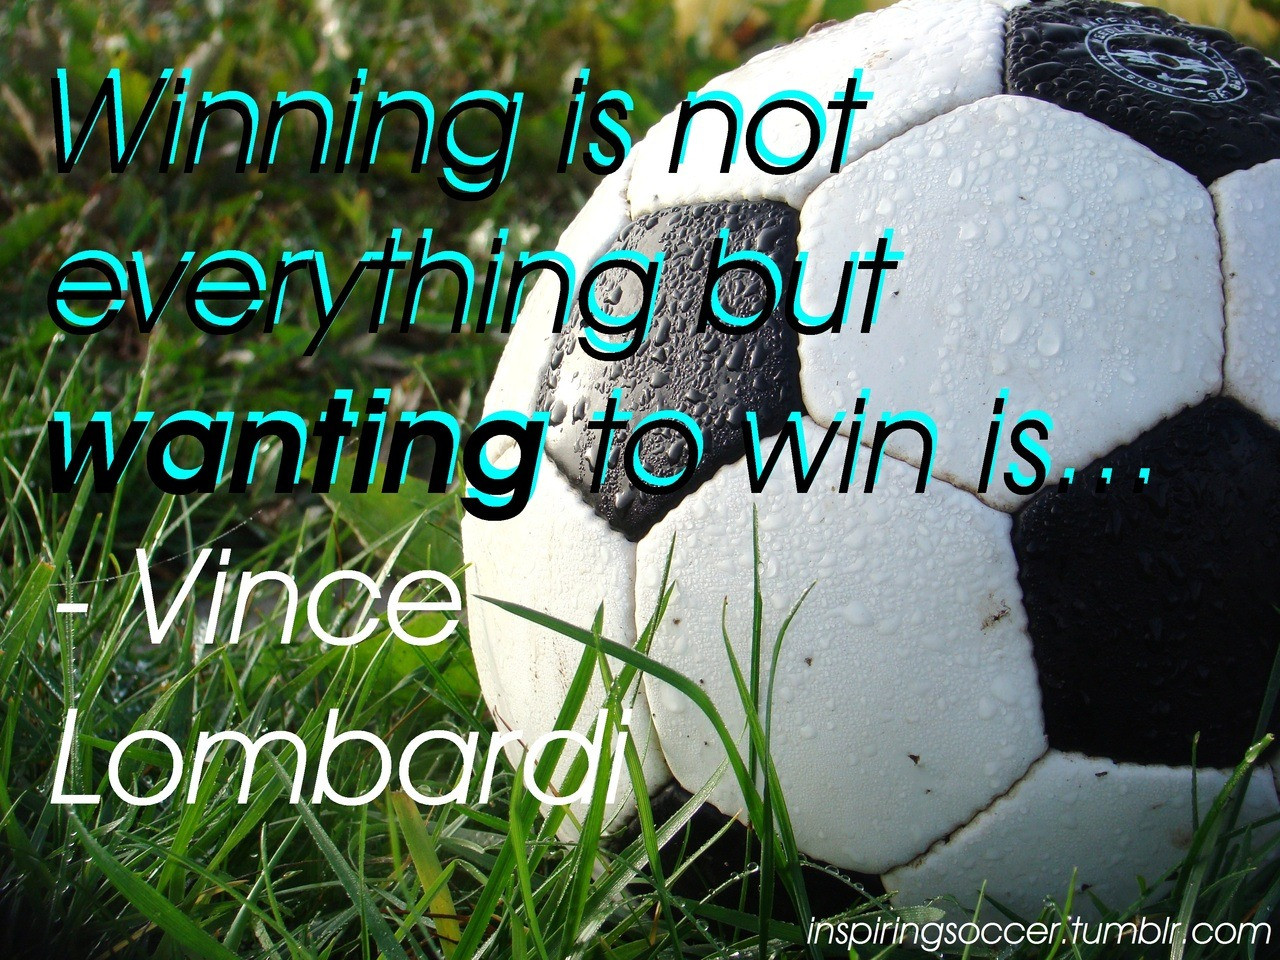 Soccer Inspirational Quote
 kane blog picz Nike Wallpaper Quotes